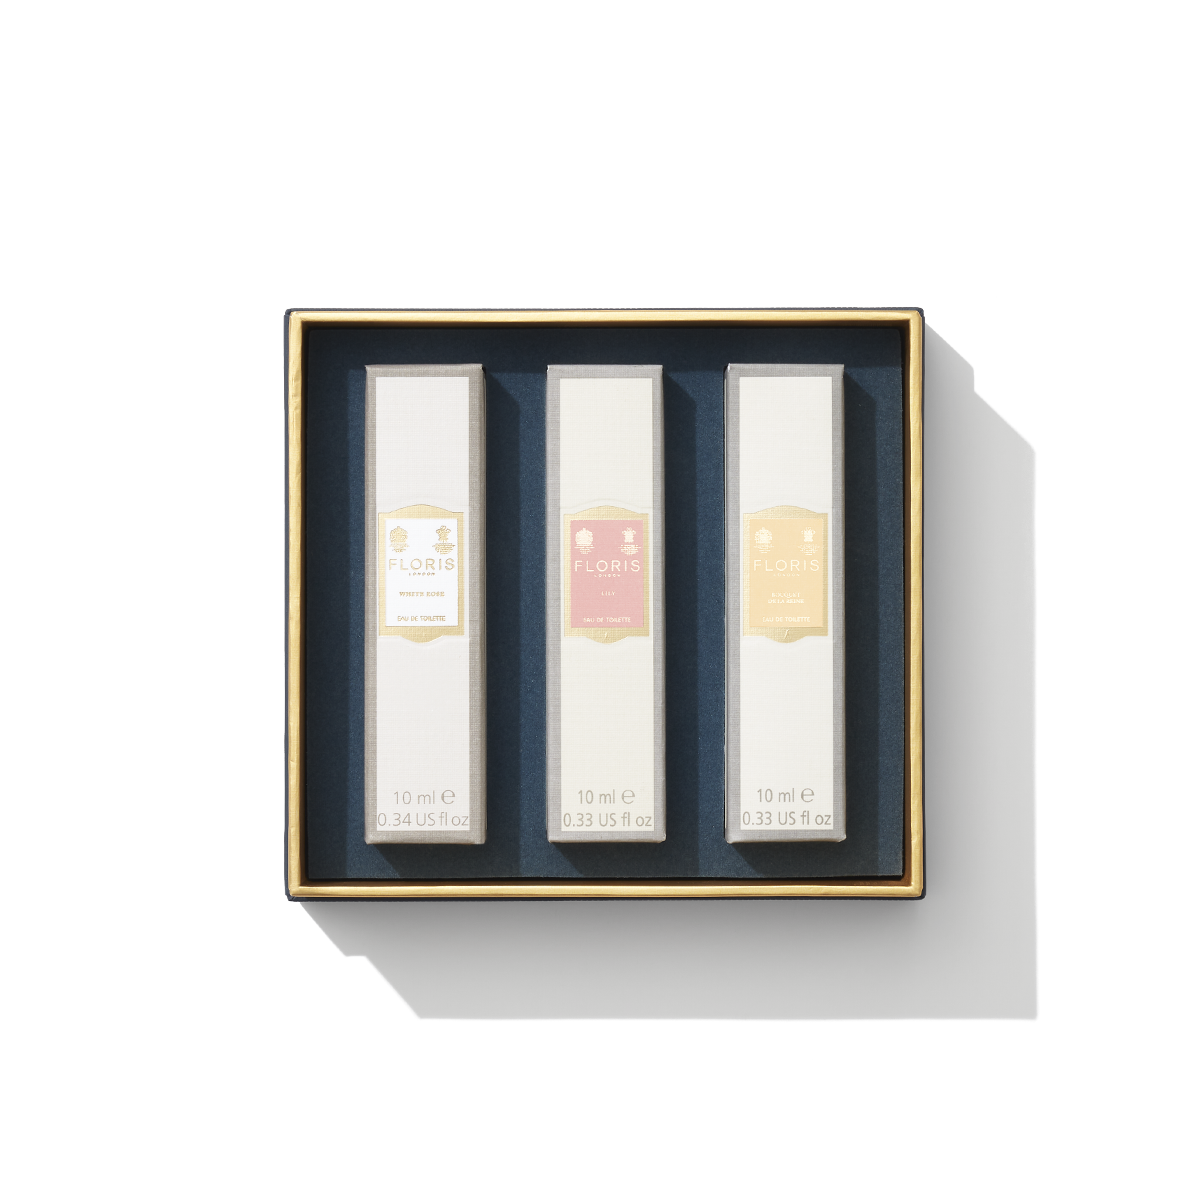 an open box with three 10ml boxes inside